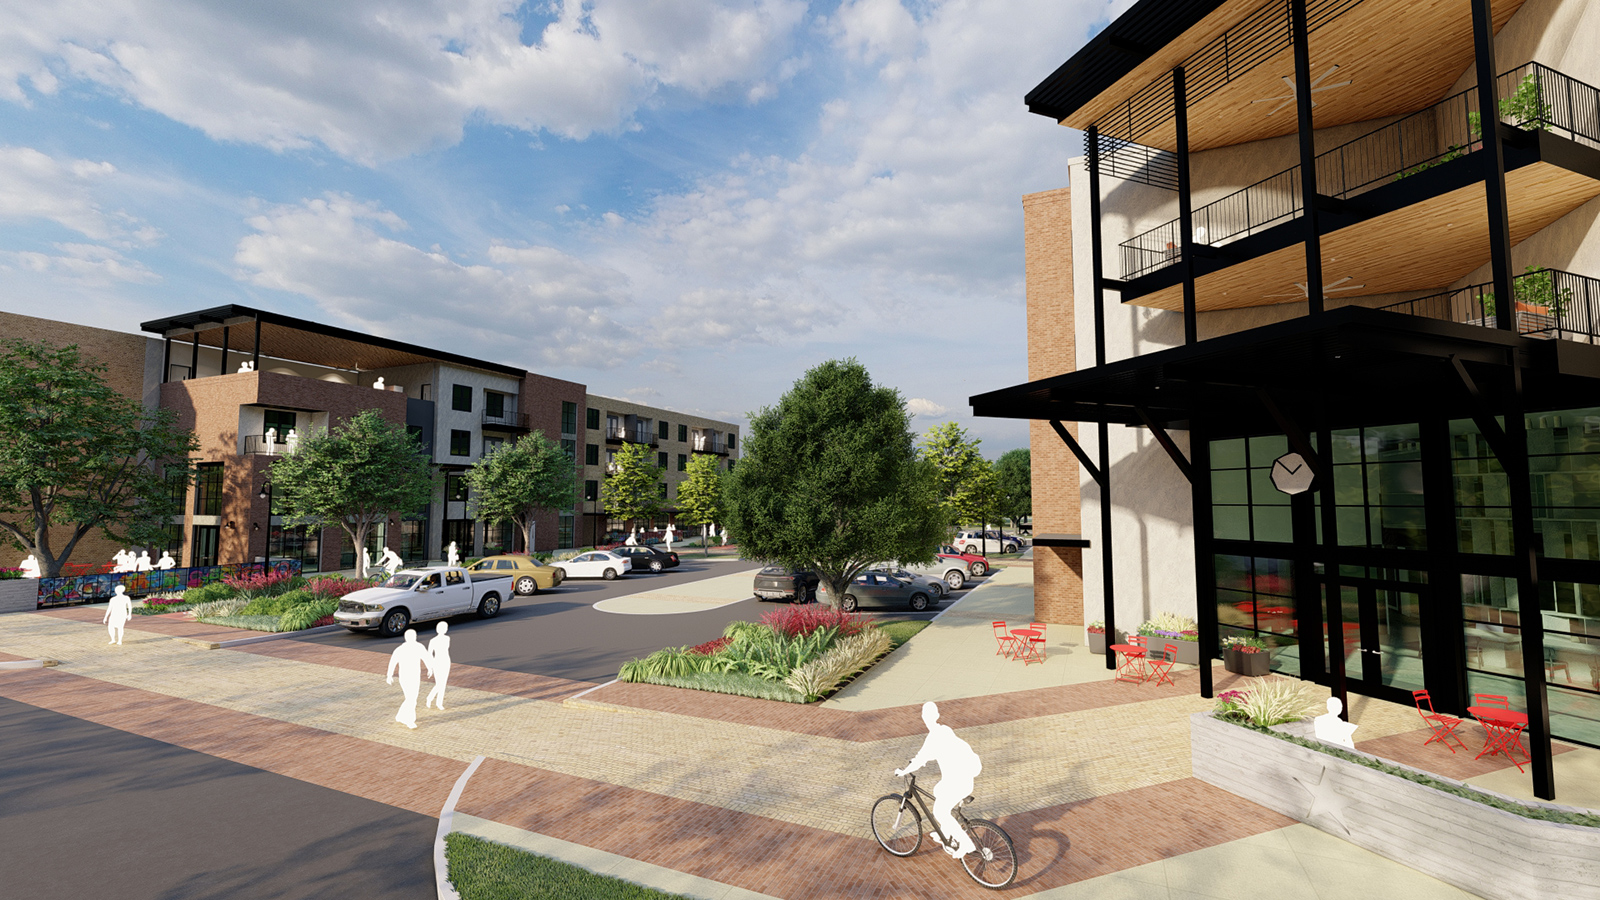 Construction Begins Near Lakeline Station Bringing New Multifamily and Retail to Austin, Texas